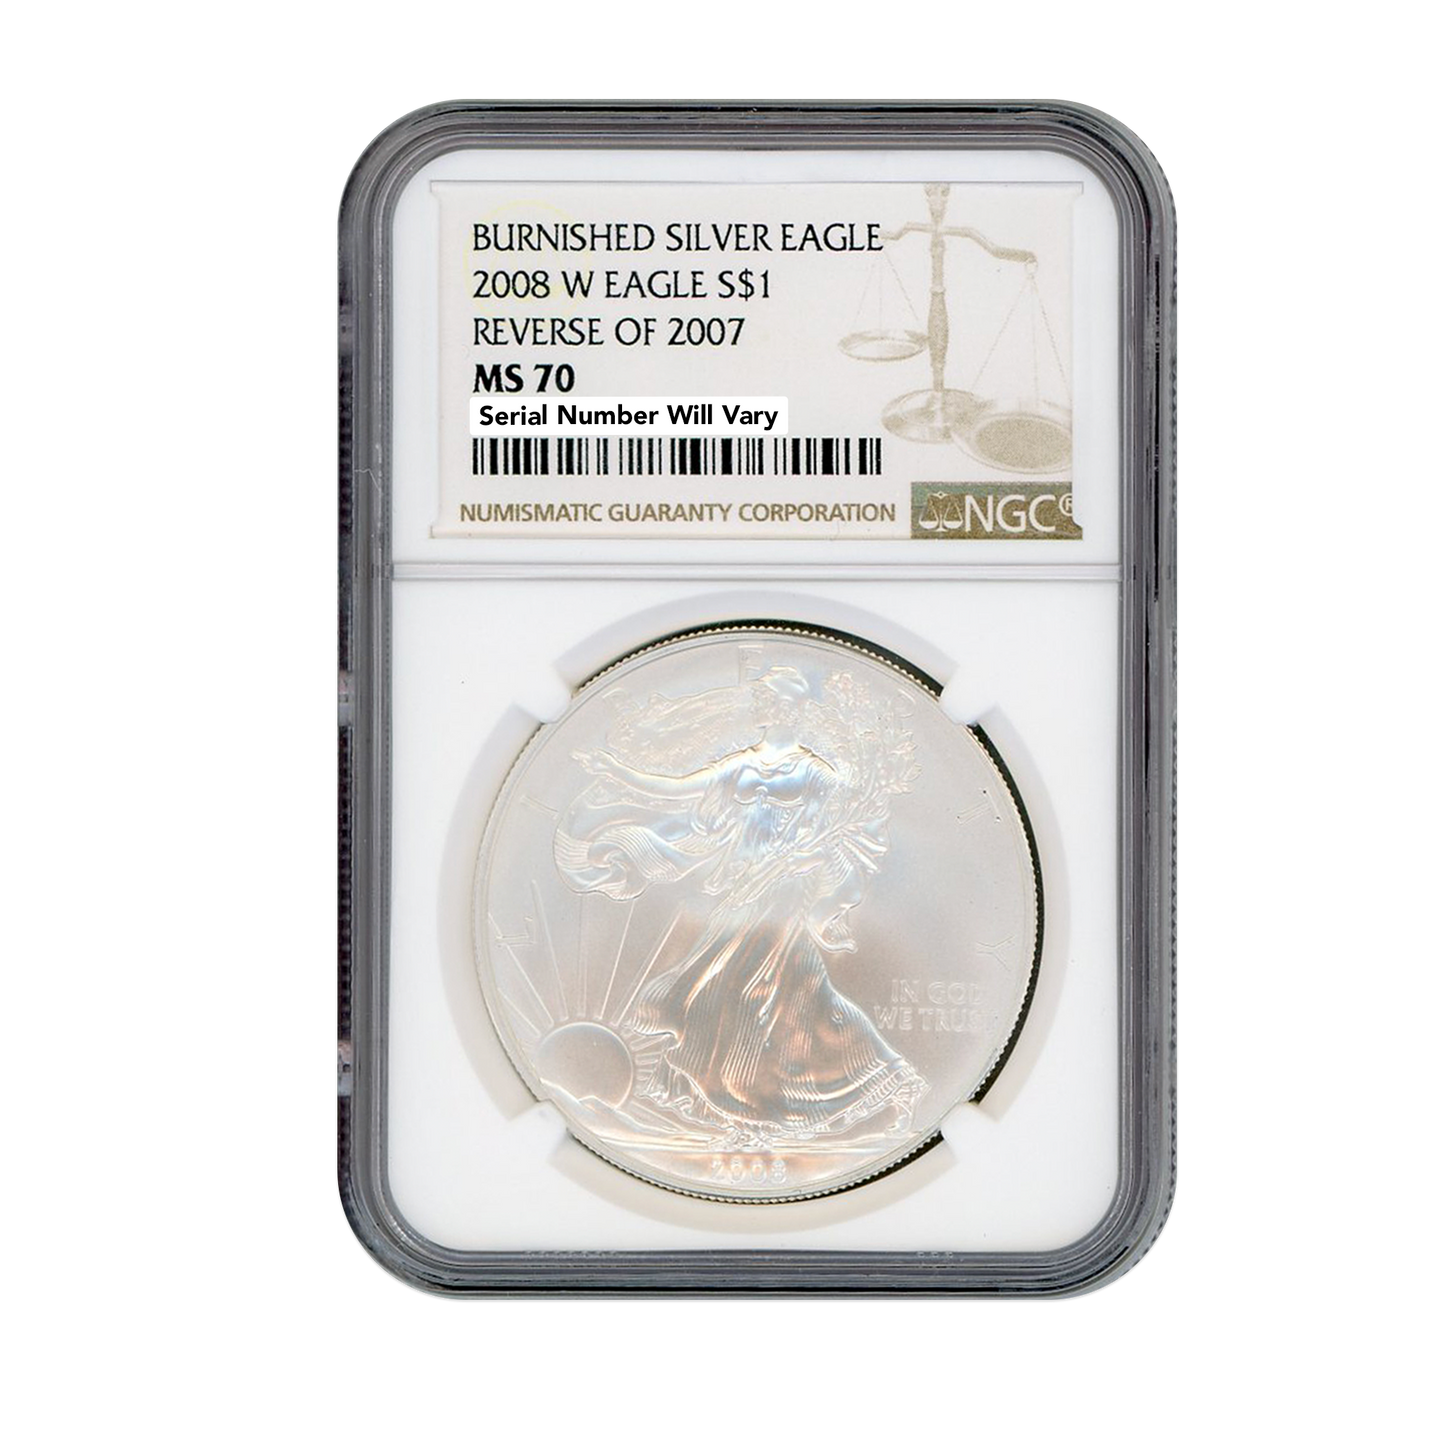 2008 West Point Burnished Silver Eagle - Reverse of 2007 -  NGC MS70